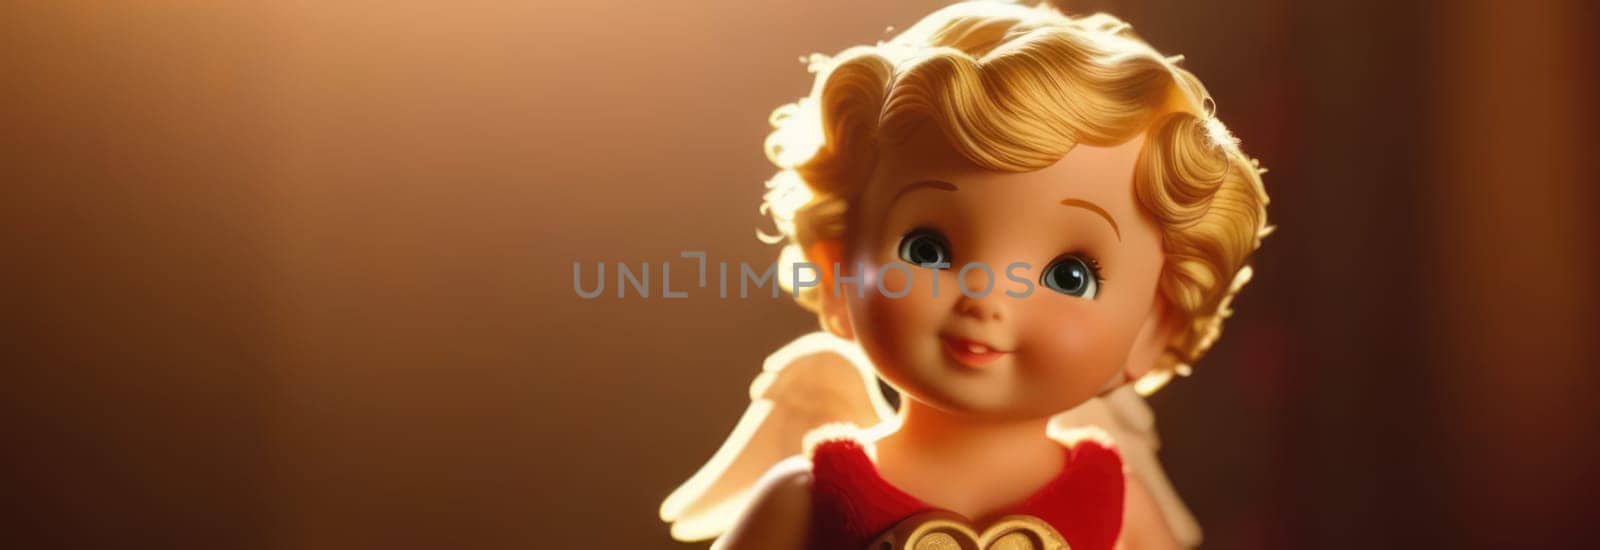 Illustration of greeting card of figurine of cute, funny baby cupid angel with gold curly hair on pastel colors background. Promotion, shopping template for love and valentines, mothers day concept. by Angelsmoon